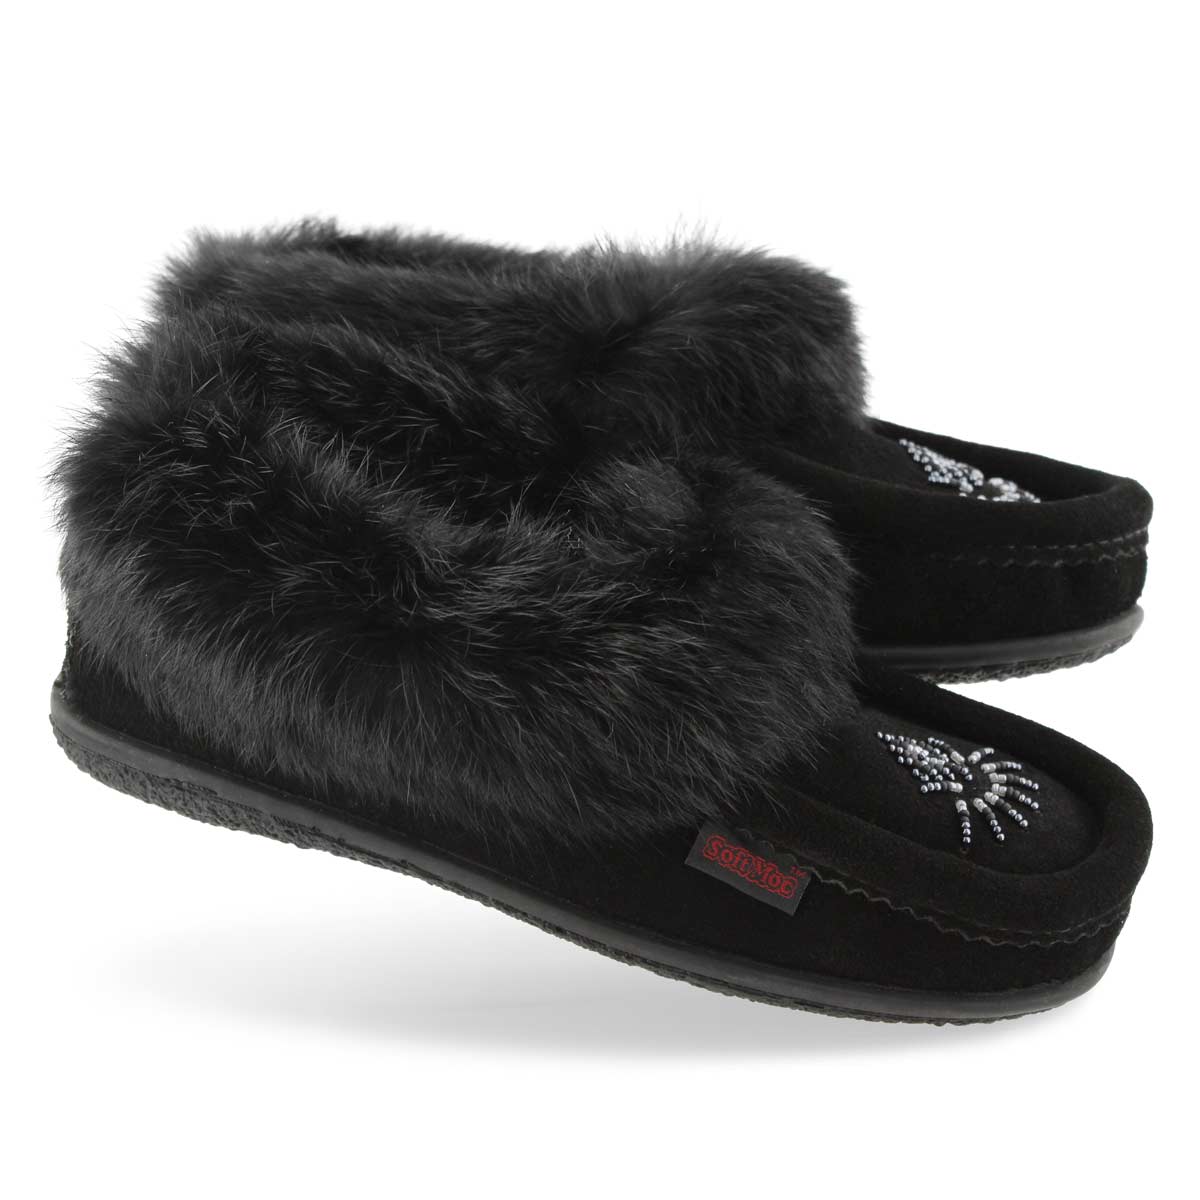 4 Rabbit Fur Beaded Moccasin Shoes Slippers